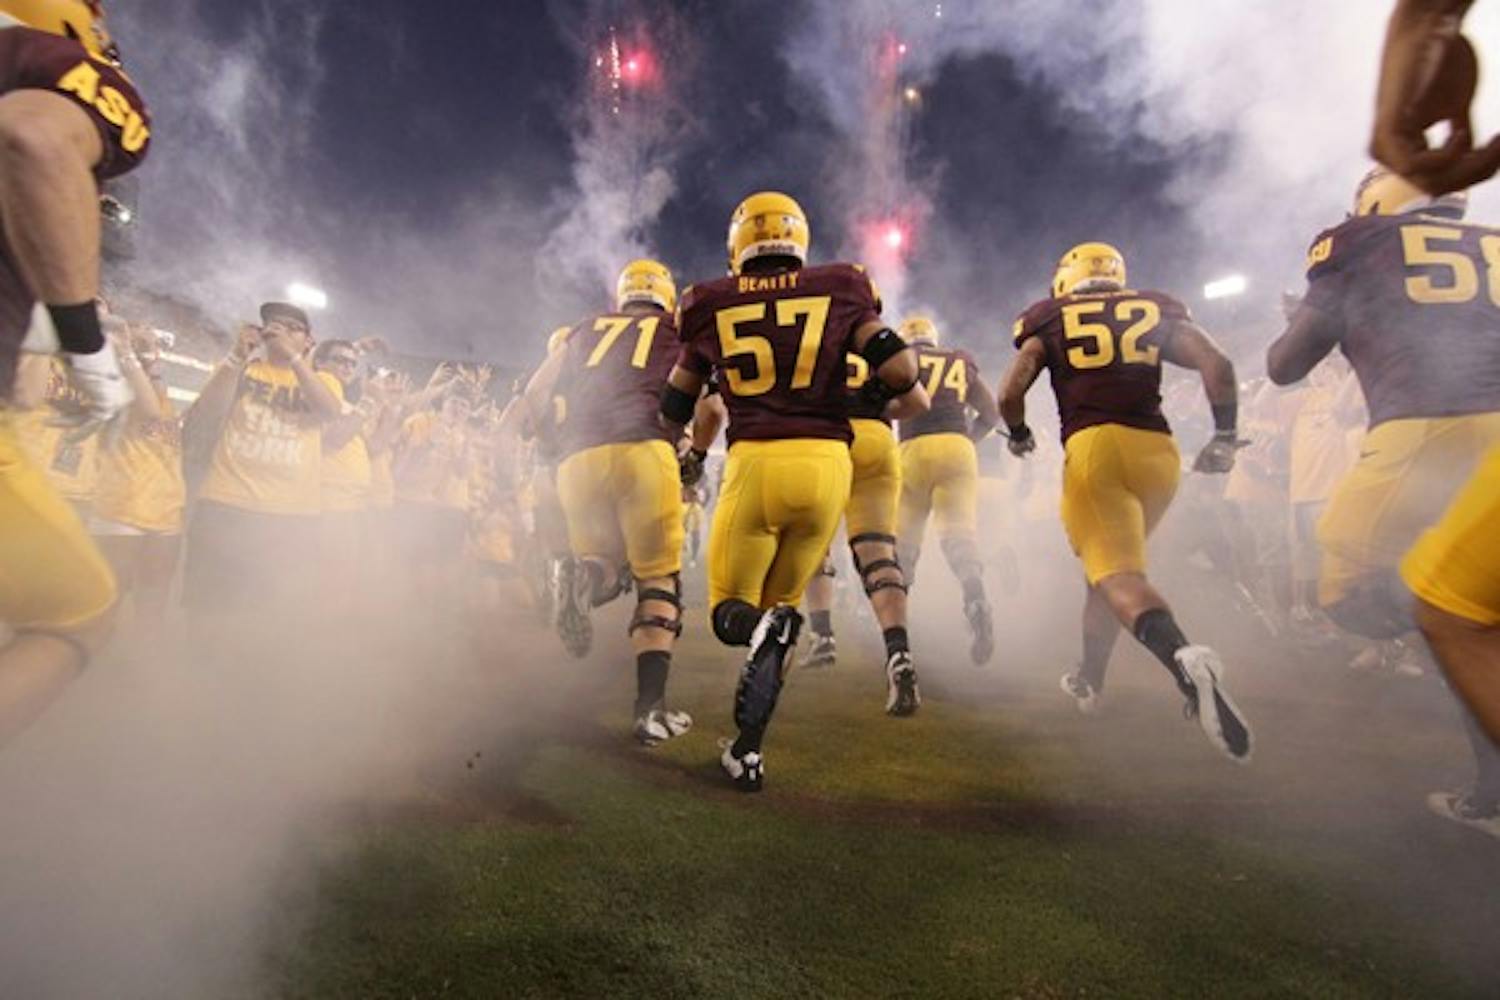 IT'S TIME: The ASU Sun Devils take the field before Thursday night's game against UC Davis.  The Sun Devils came out on top 48-14. (Photo by Beth Easterbrook)